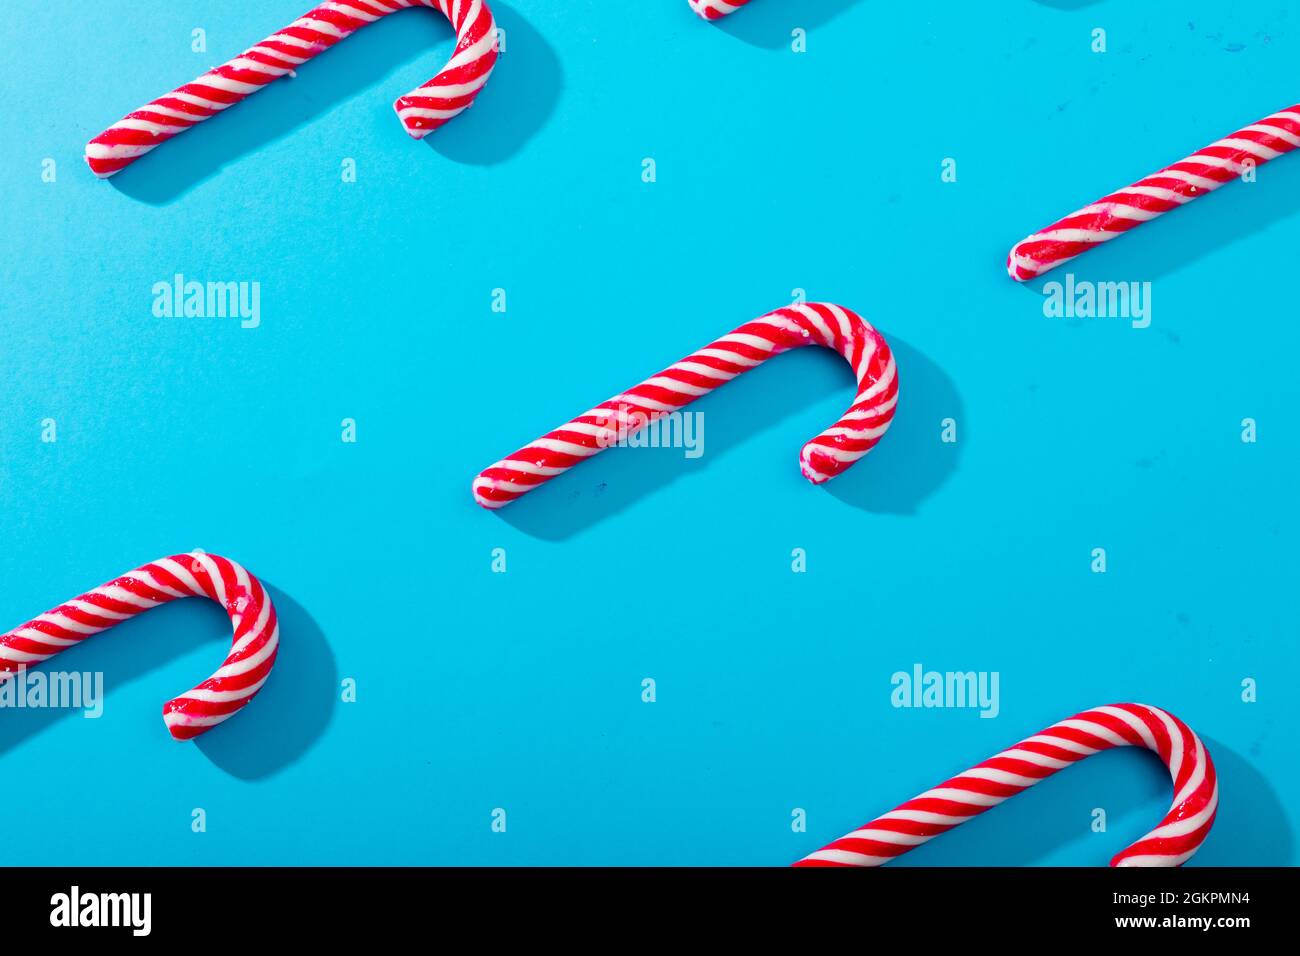 Composition of multiple rows of candy canes on blue background Stock Photo